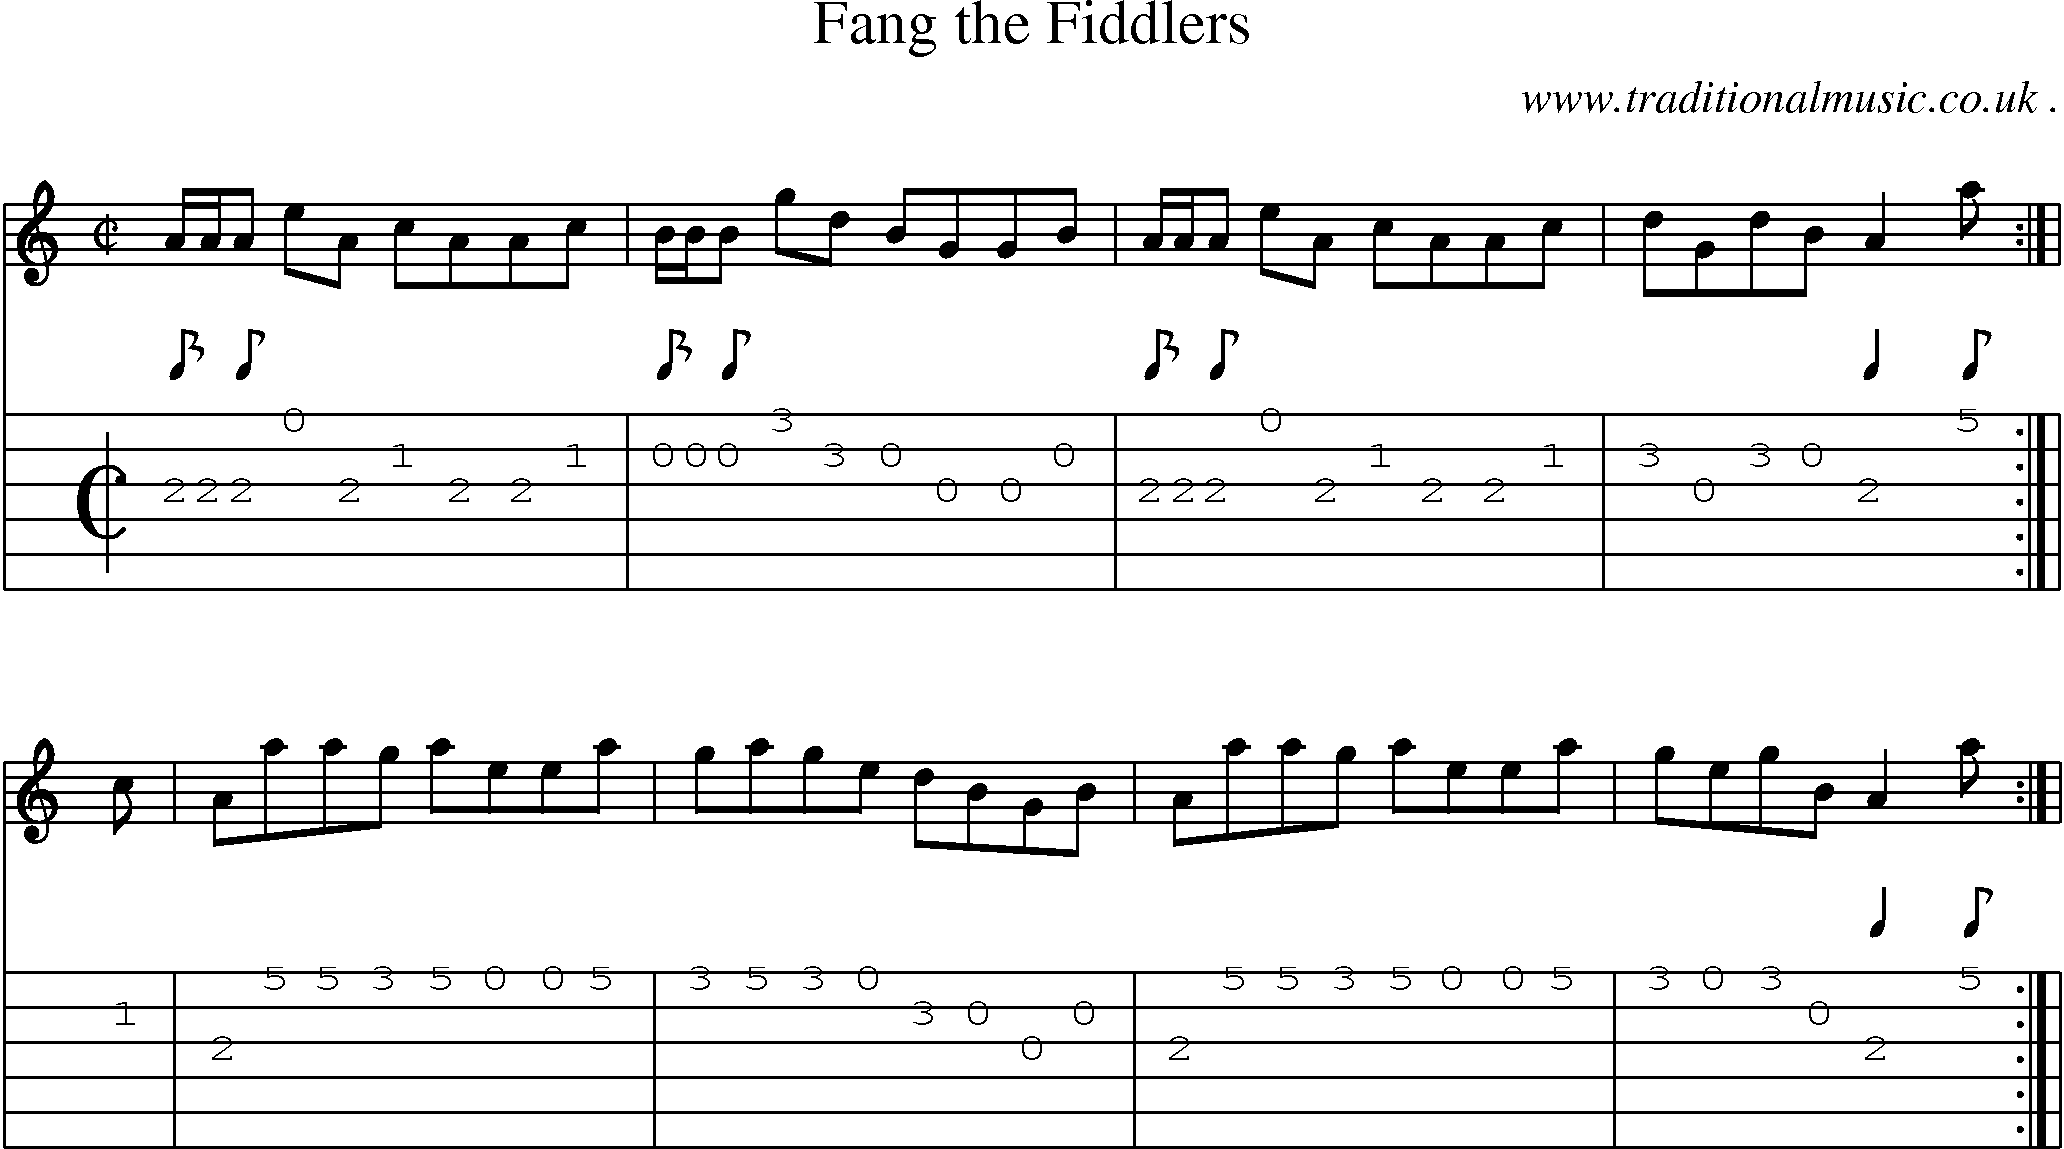 Sheet-Music and Guitar Tabs for Fang The Fiddlers